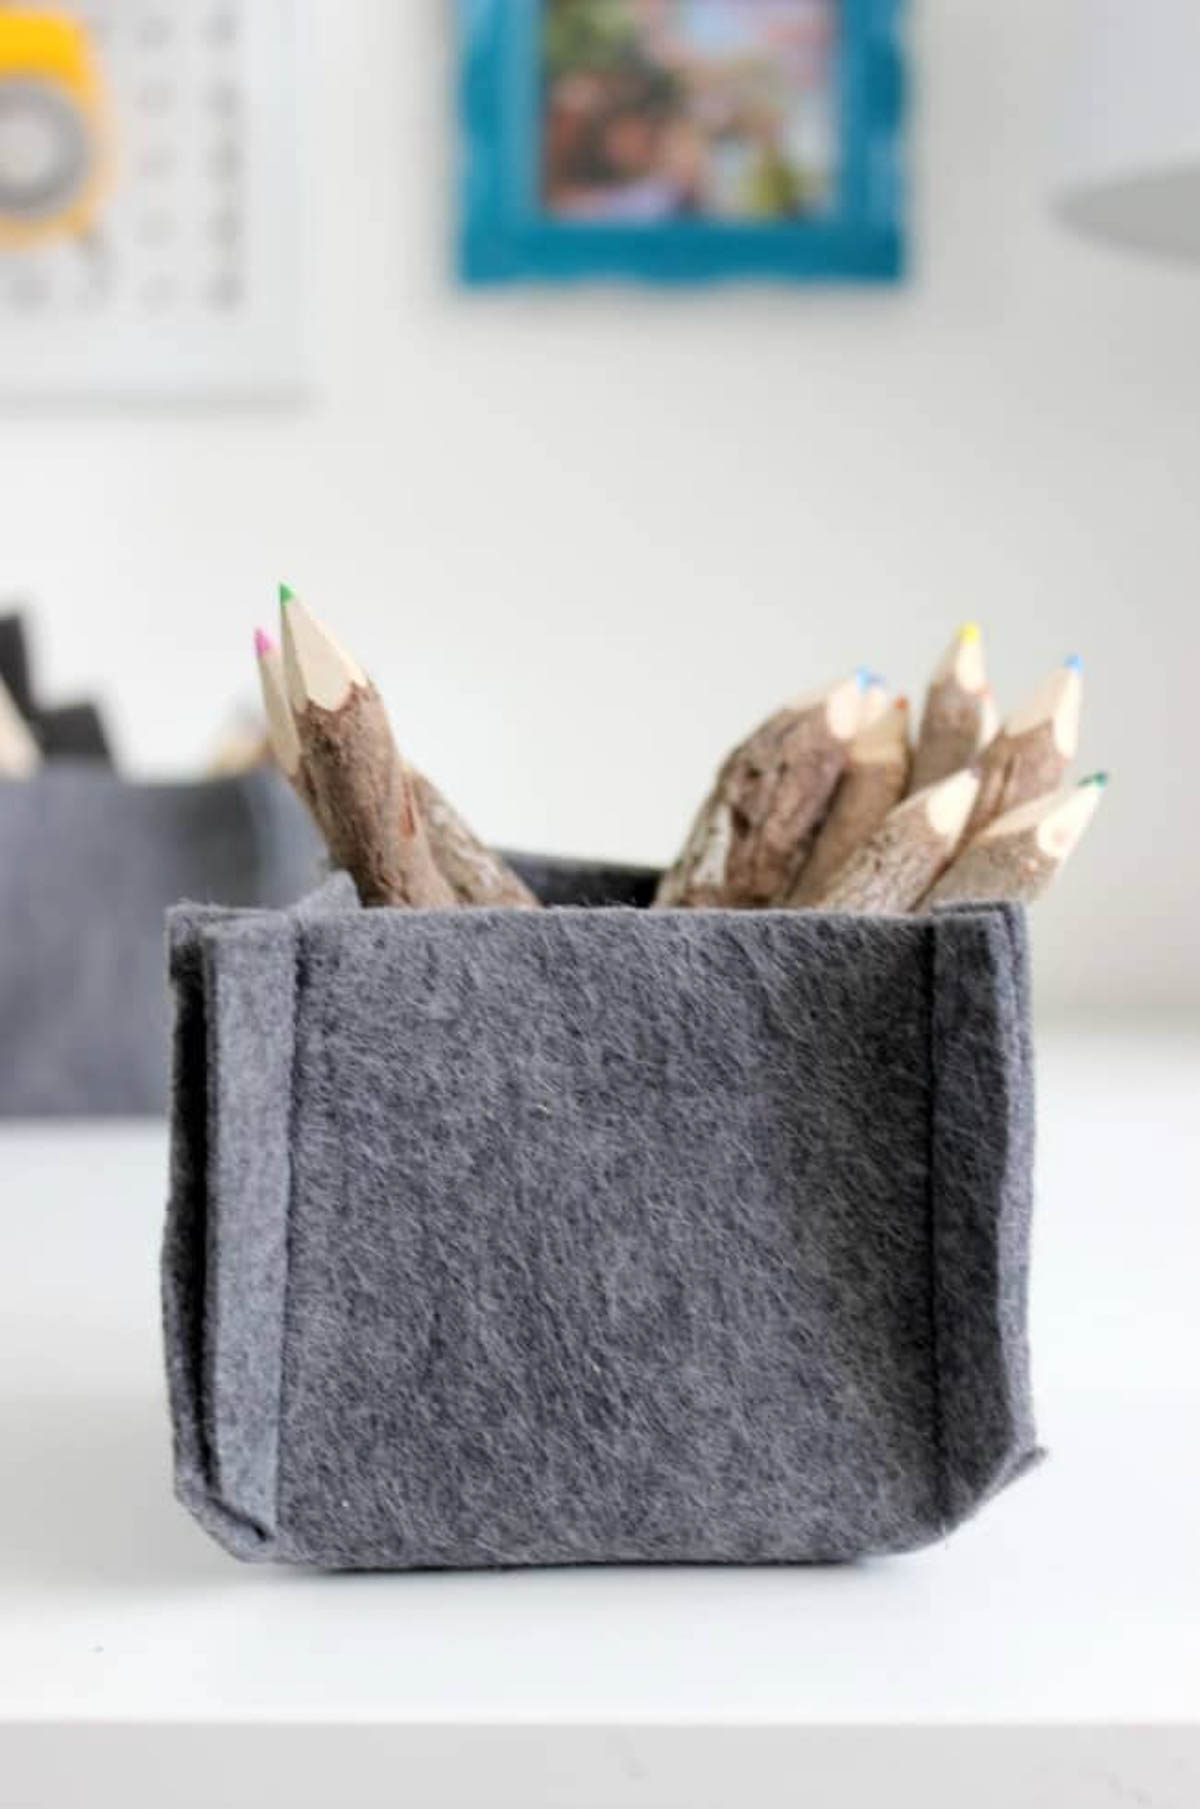 Felt container with wooden colored pencils